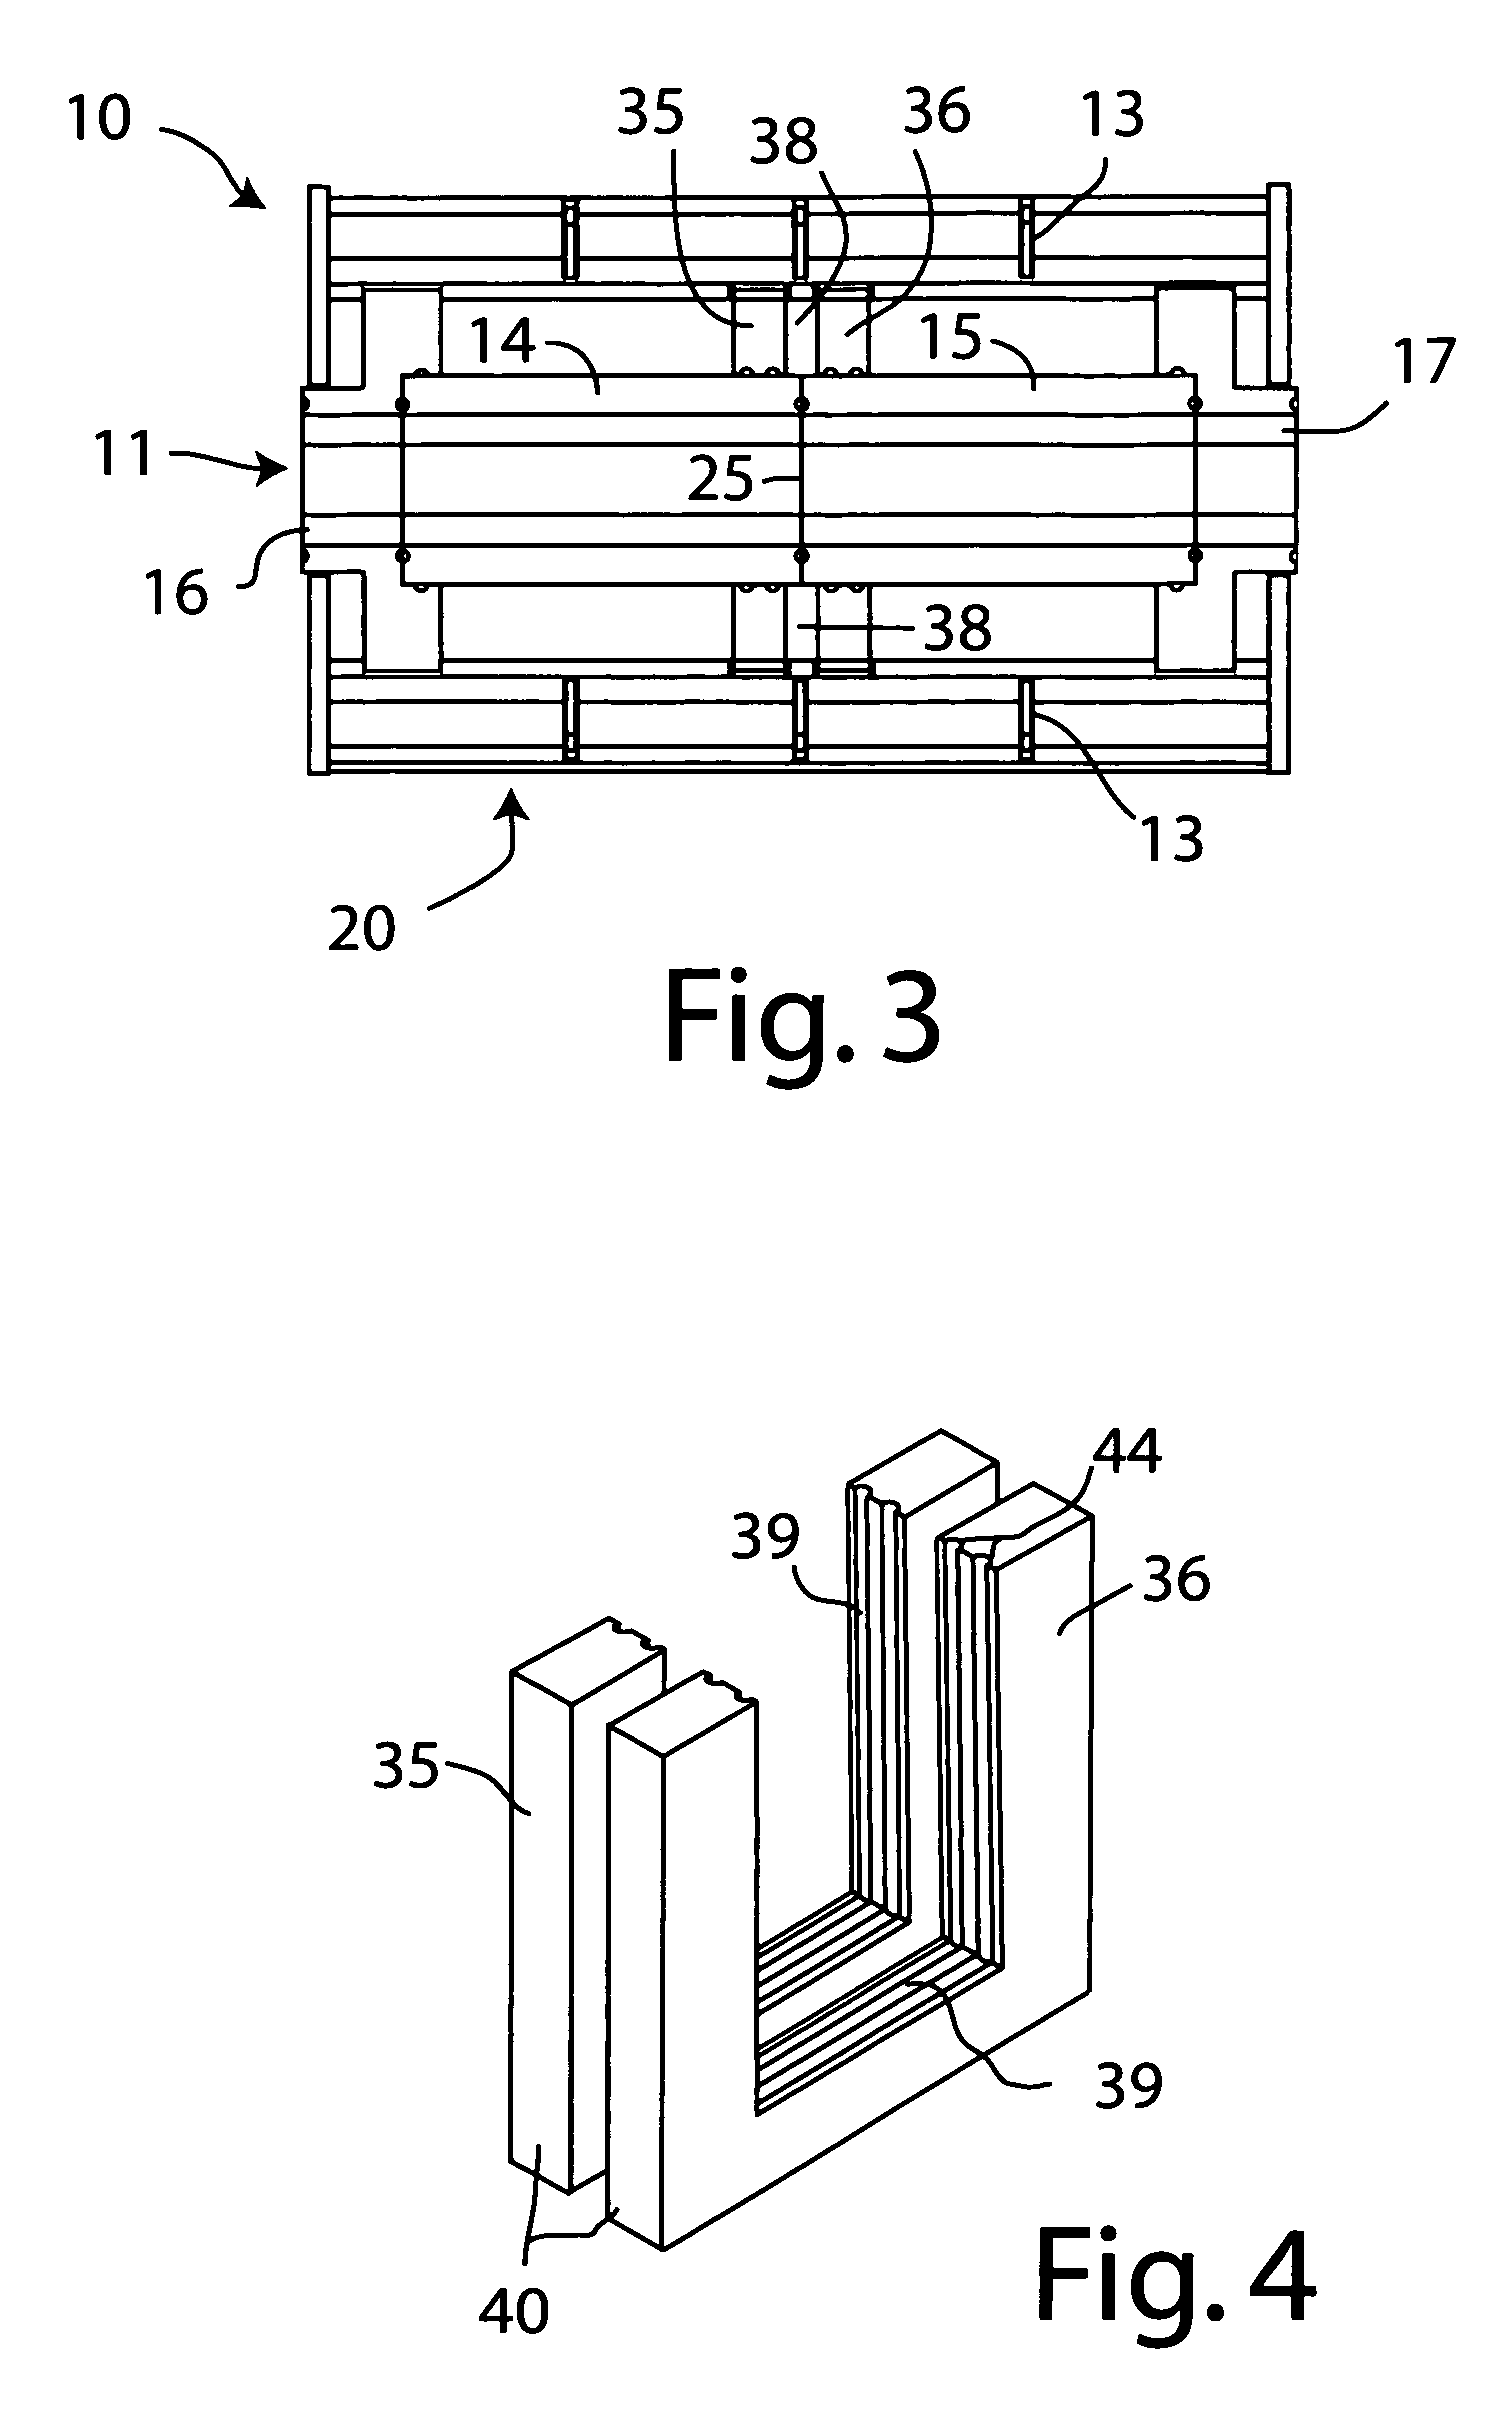 Molten metal leakage confinement and thermal optimization in vessels used for containing molten metal